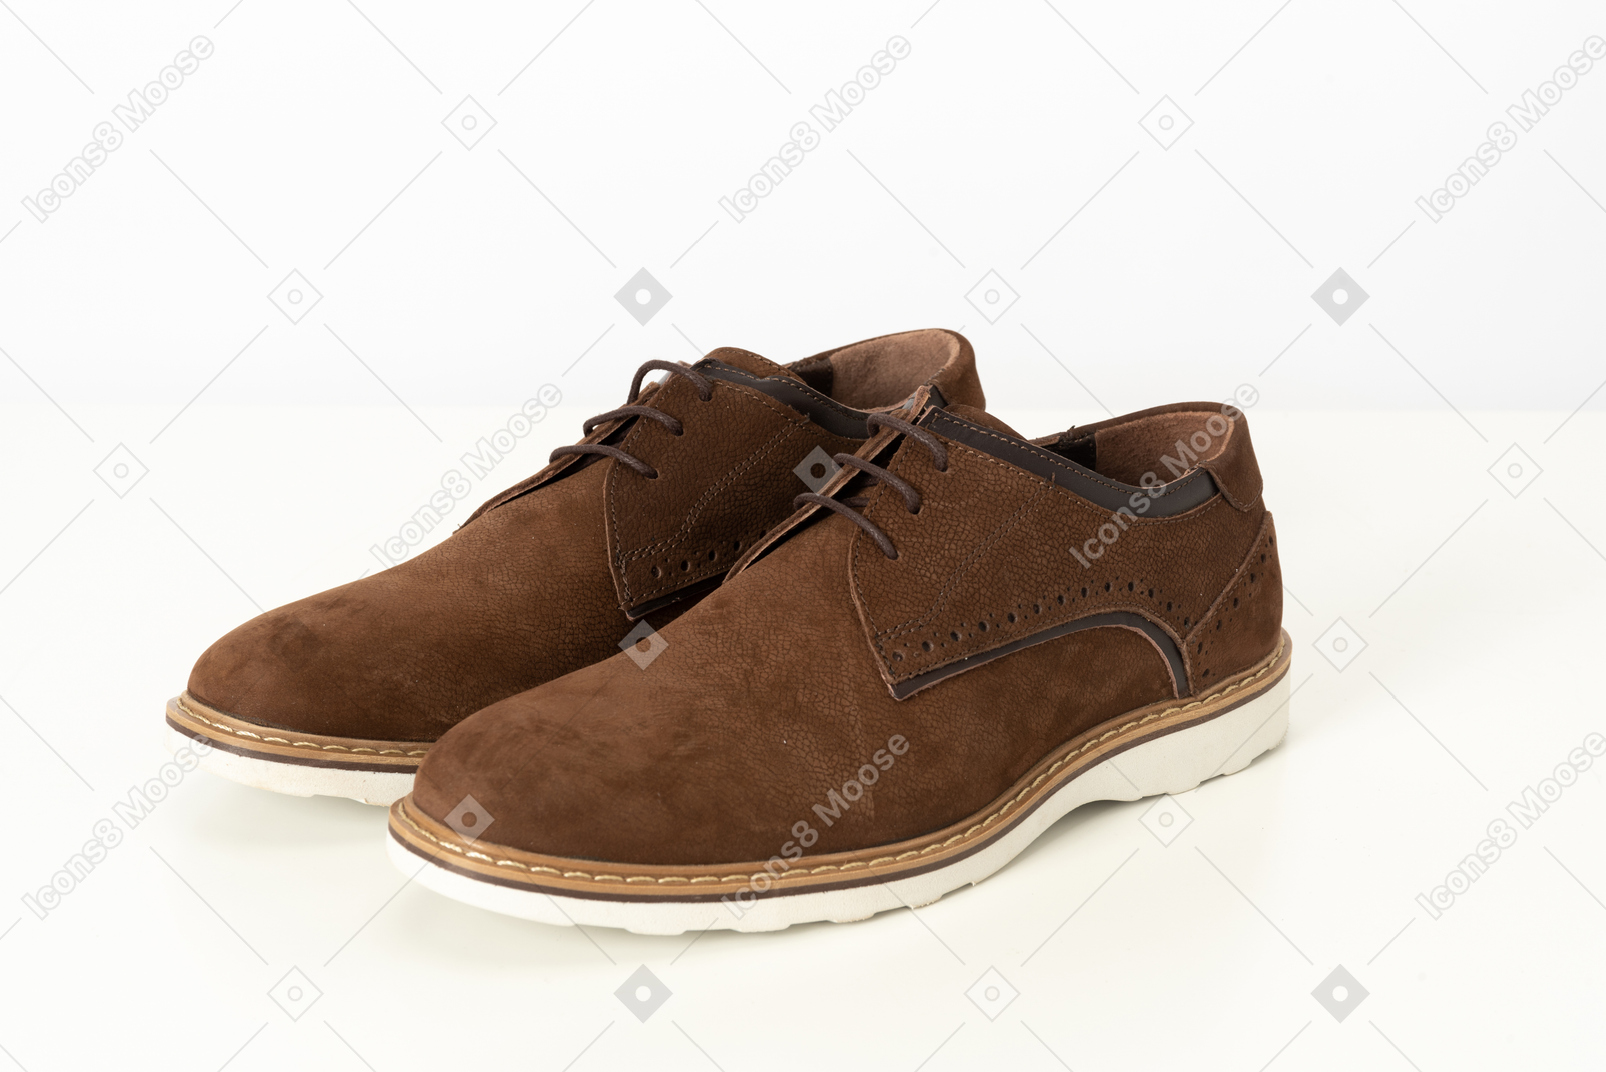 Brown shoes on a white background